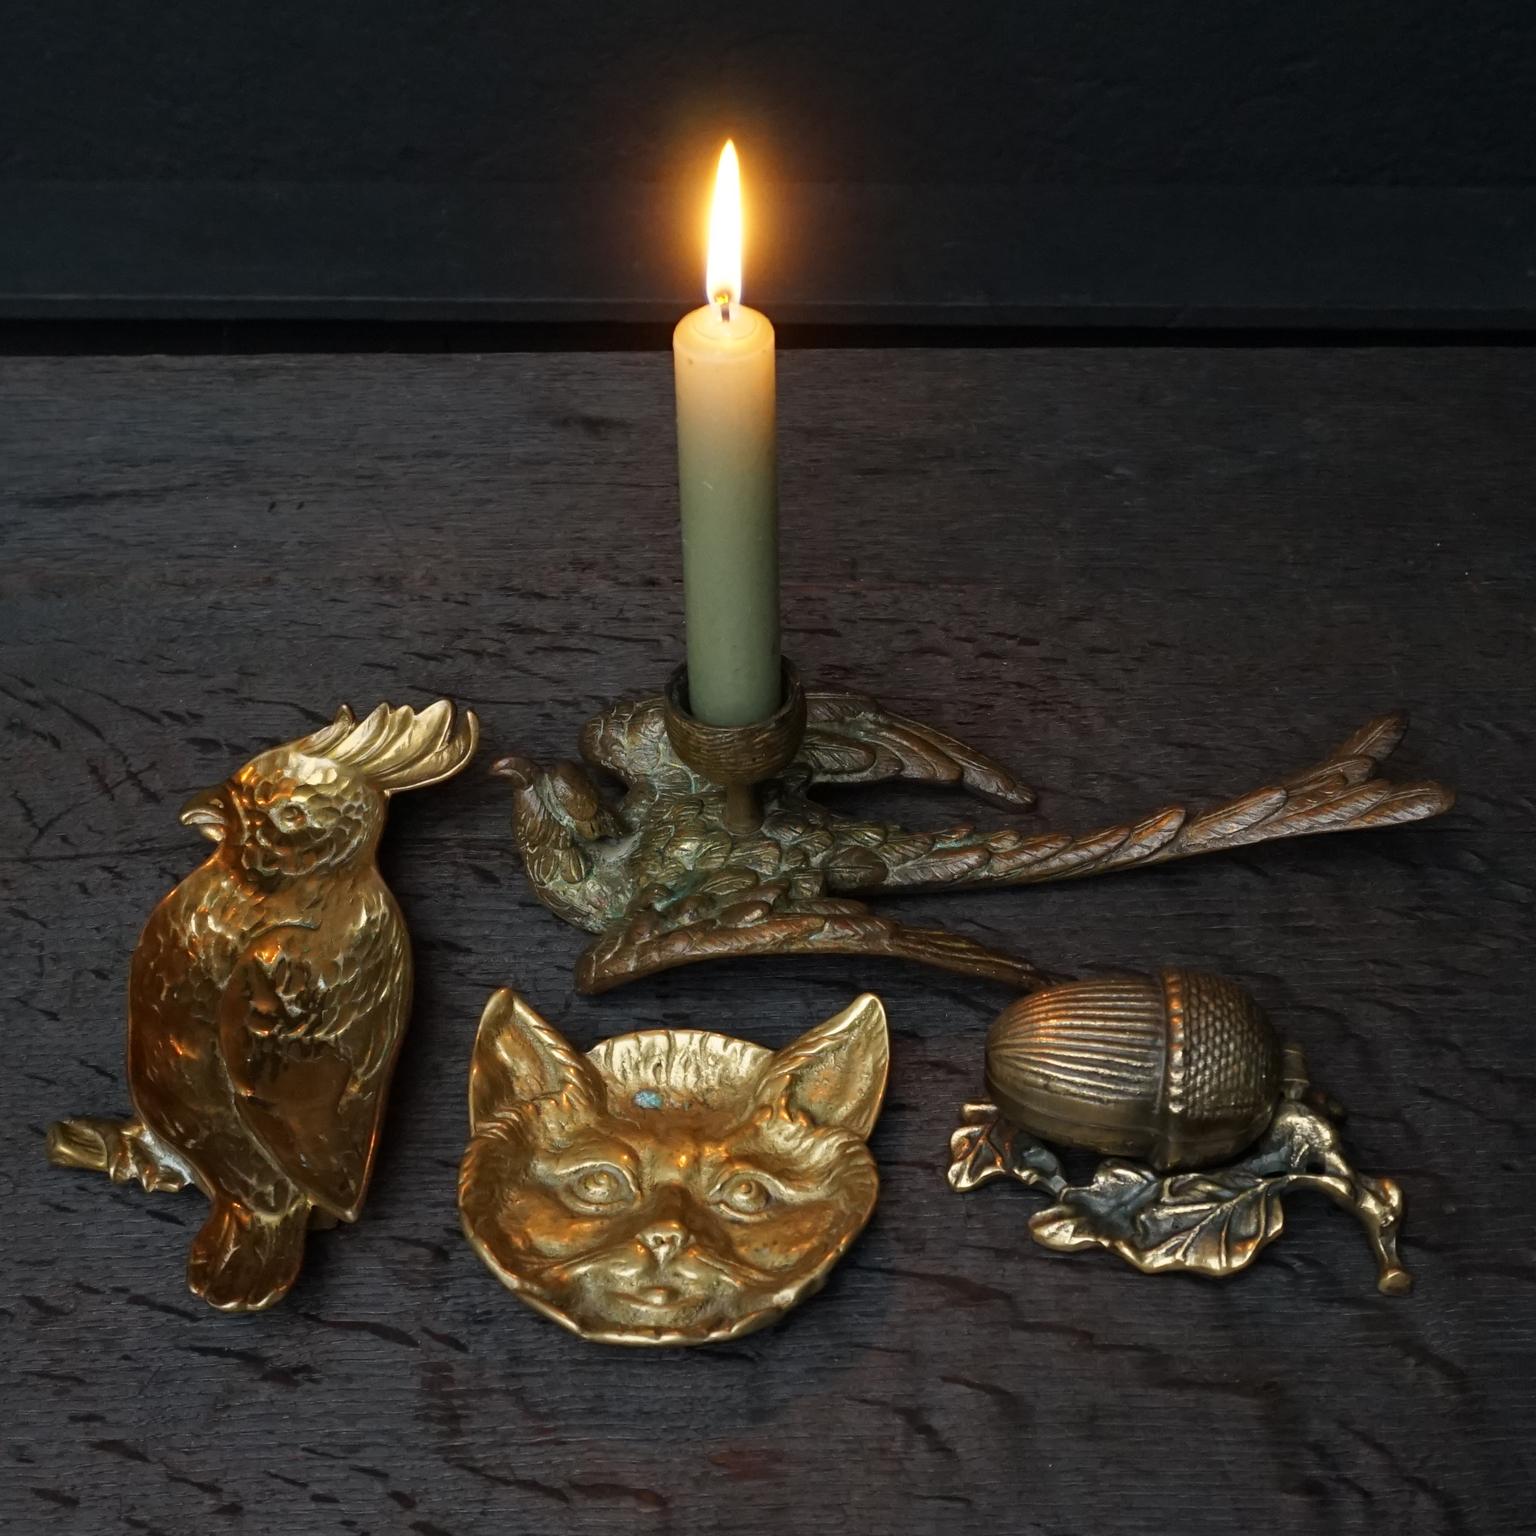 Decorative collection of four little brass vide-poche trinket dishes and a candleholder to keep or collect your little trinkets in and shine a little light on your lovelies.

Use them to put your jewelry in on your nightstand before going to